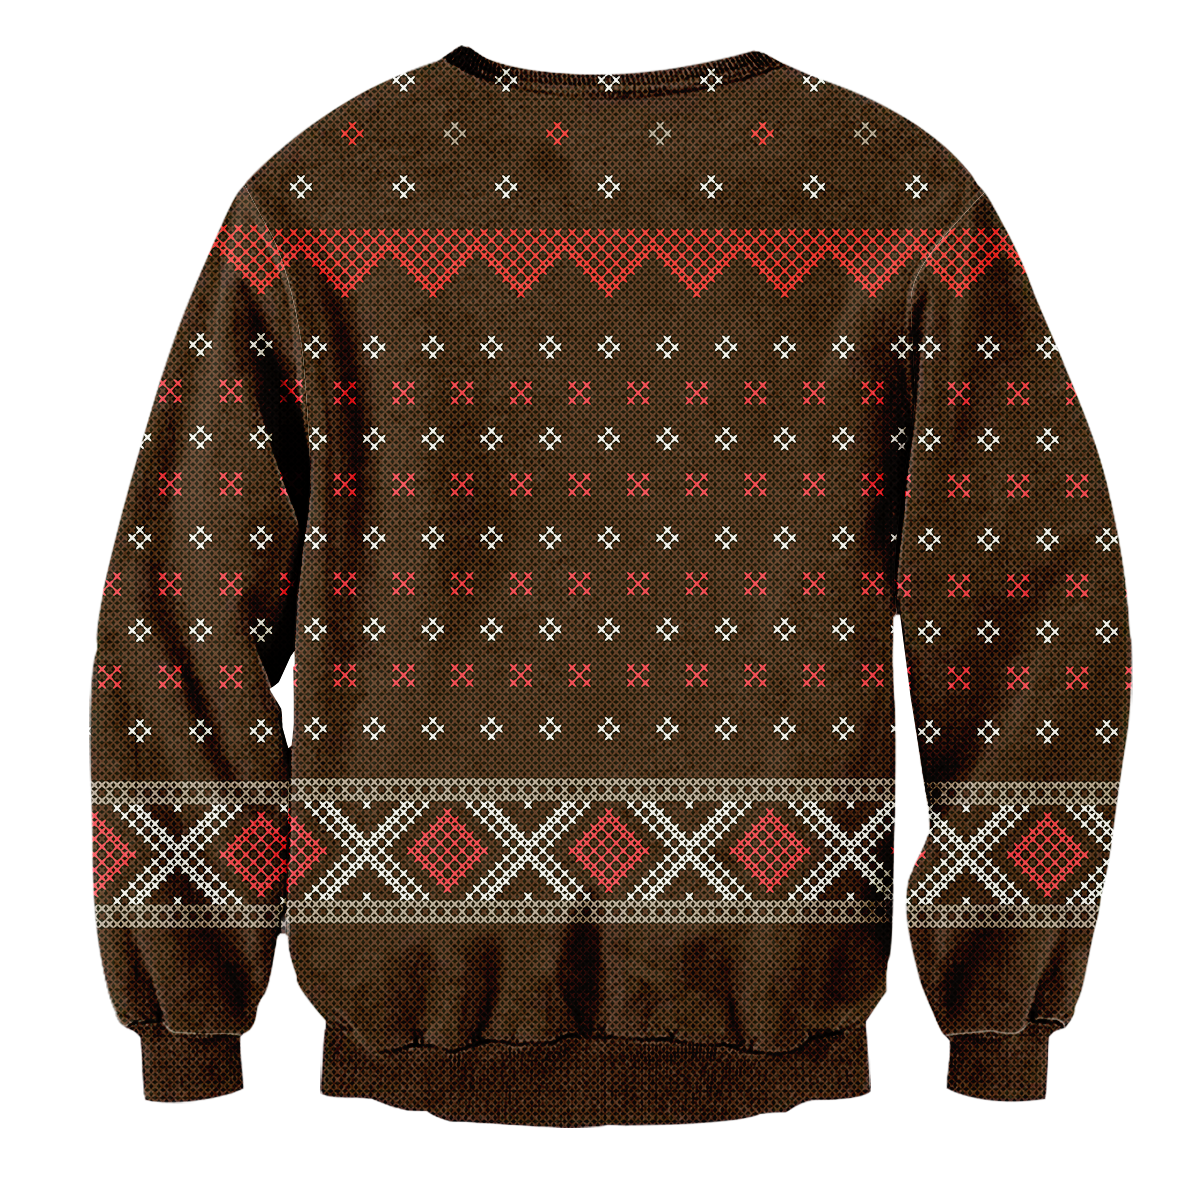 A-A-Ron Unisex Sweater